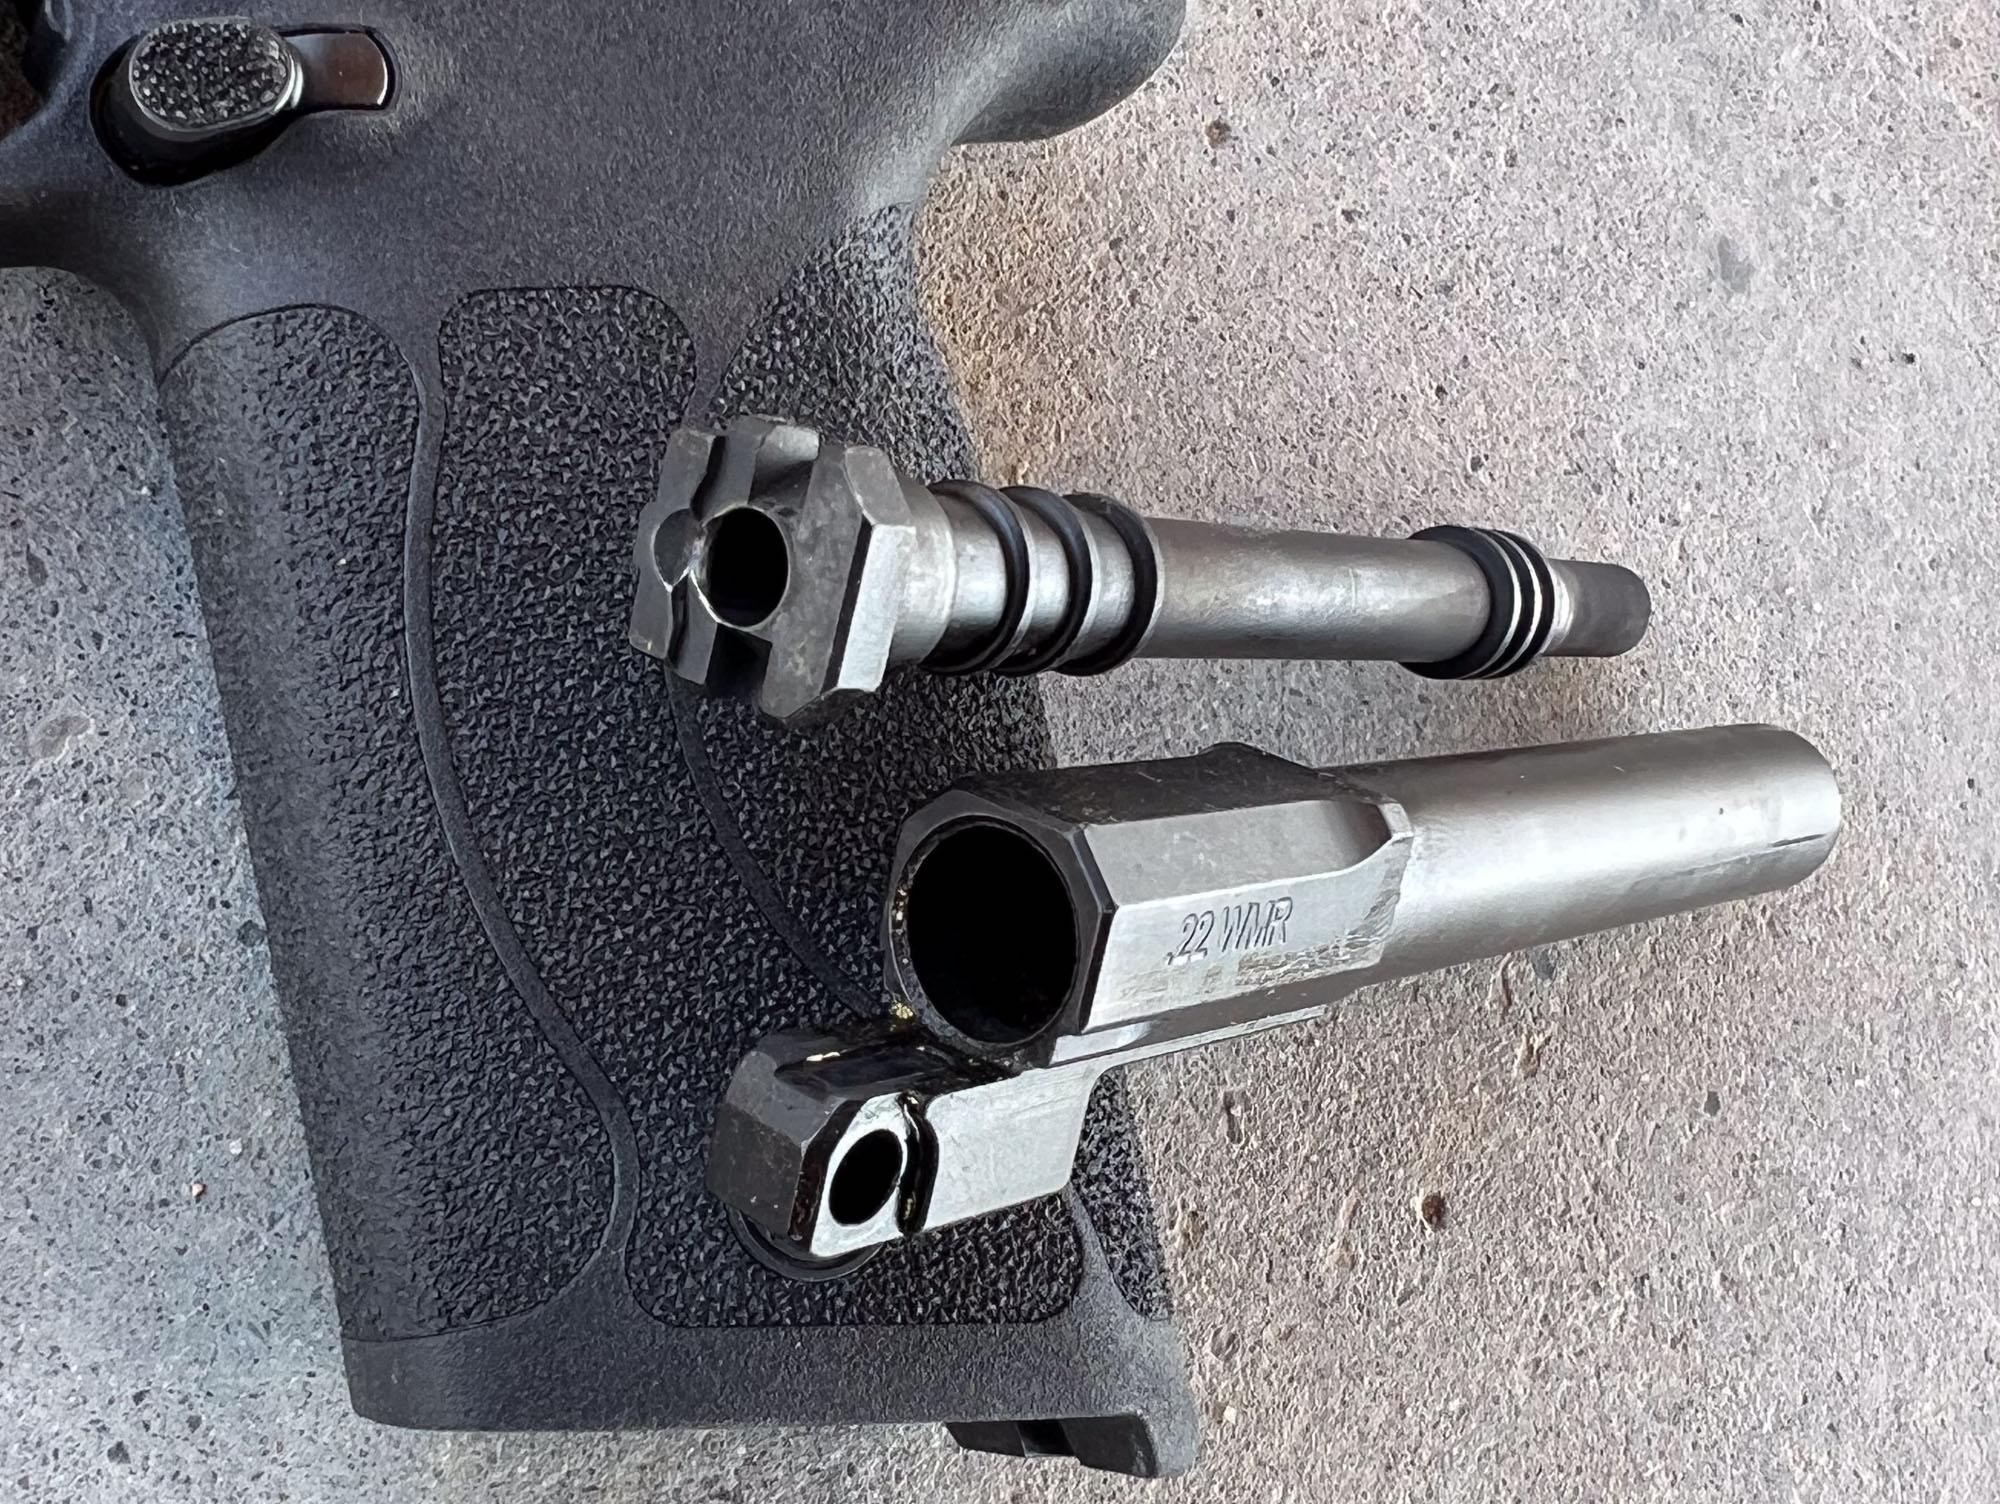 Smith & Wesson M&P 22 Magnum barrel assembly